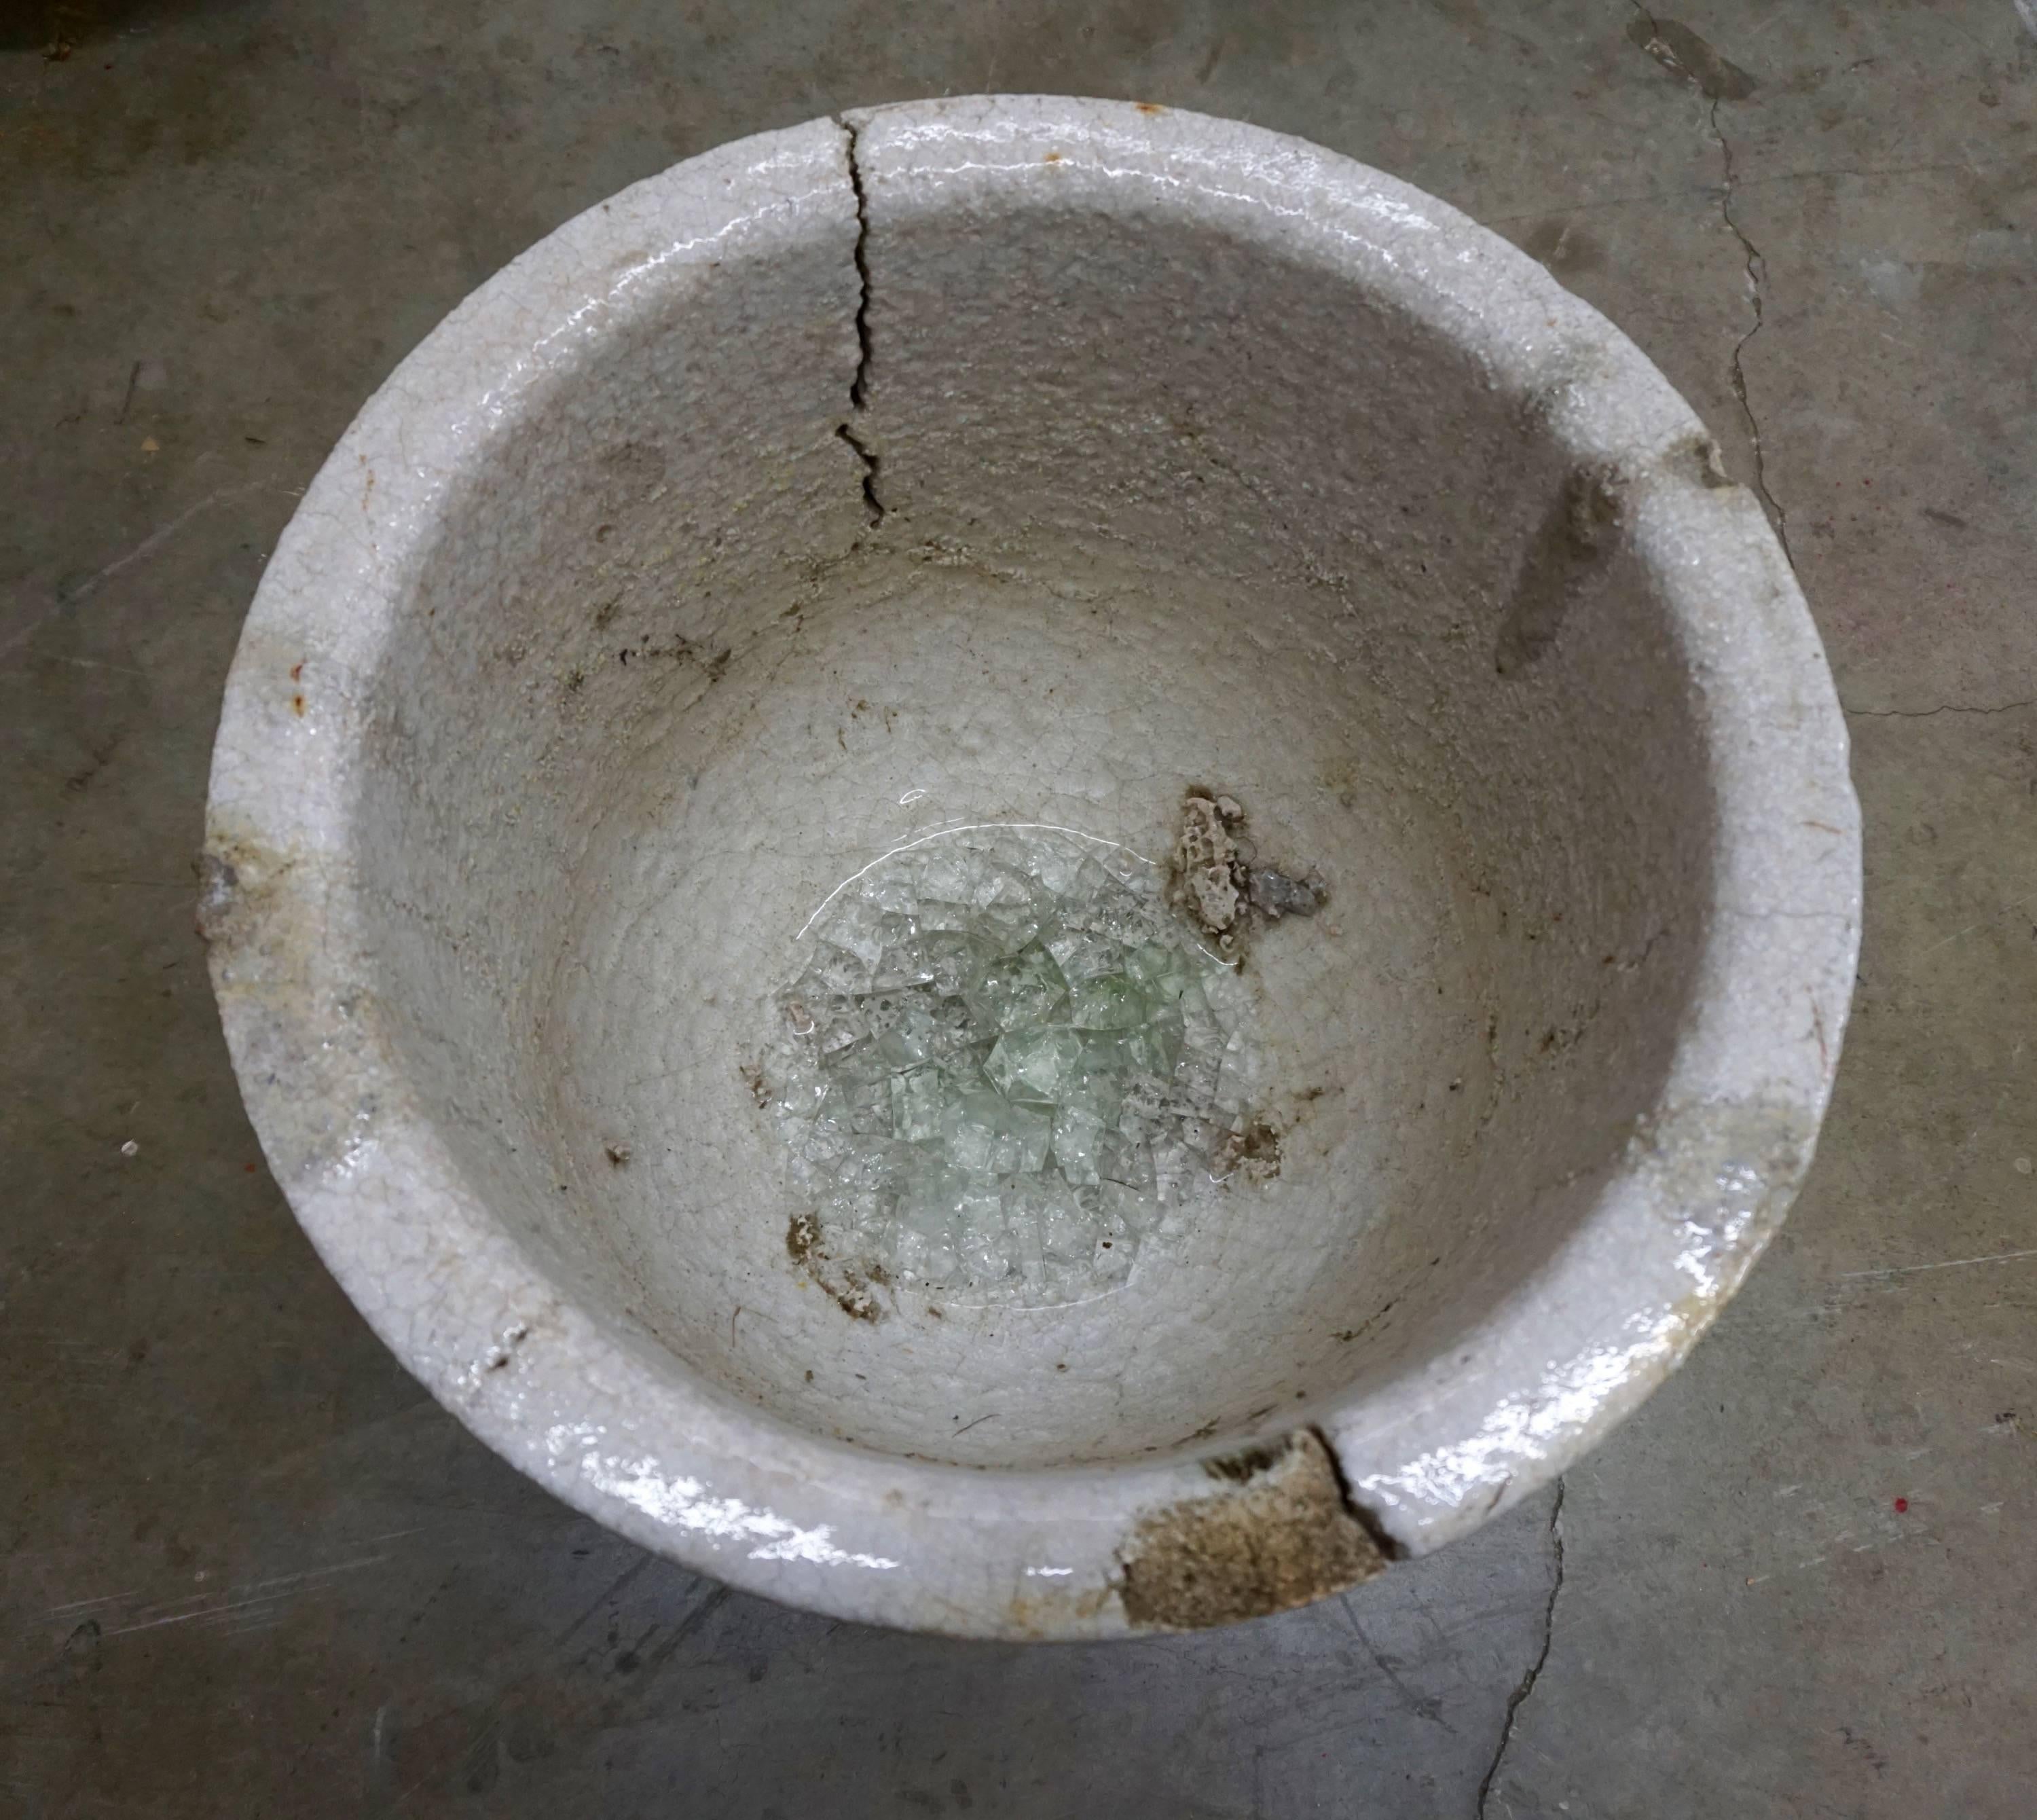 Ceramic vessel used by glaziers to melt glass at very high temperatures. Enhanced by the crackling, glass remnants and drippings. Can be used as a planter or decorative object, indoors or outdoors.
Multiple crucibles available.